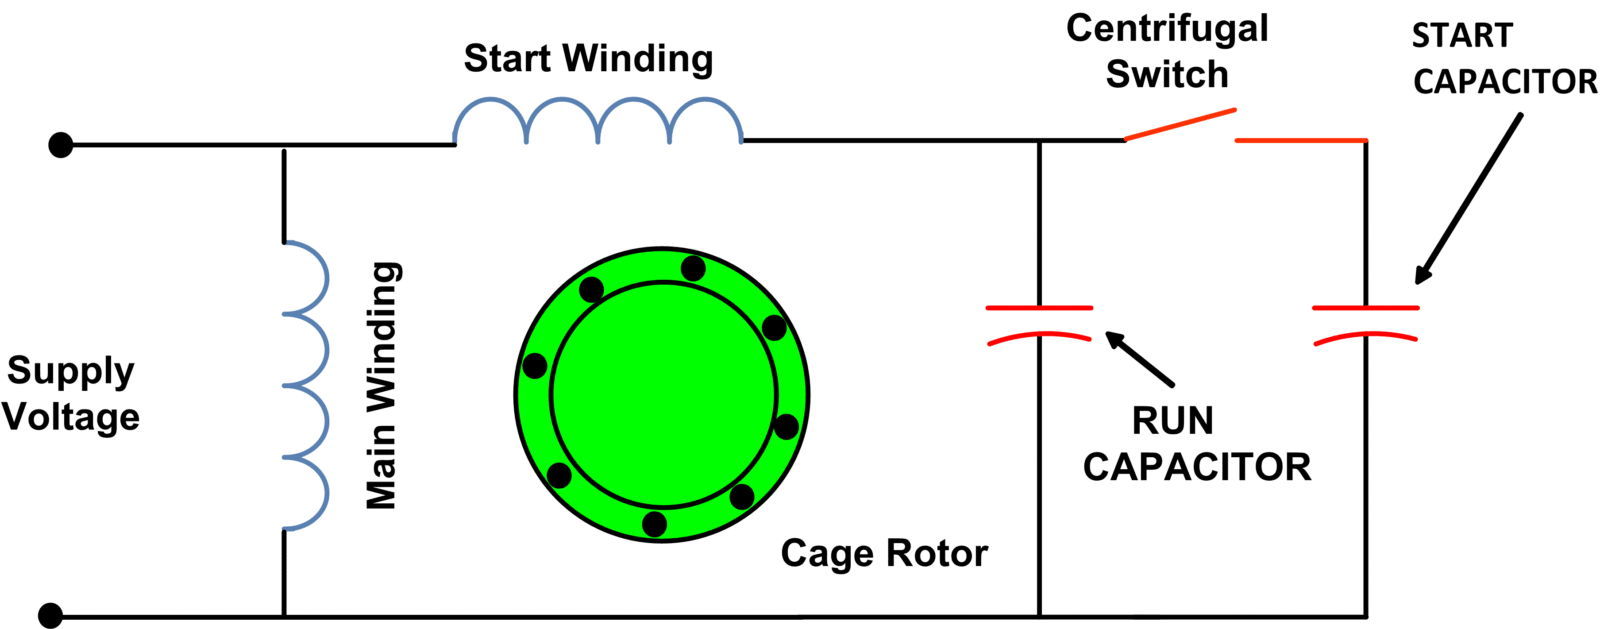 State different applications of capacitor start single phase induction motor